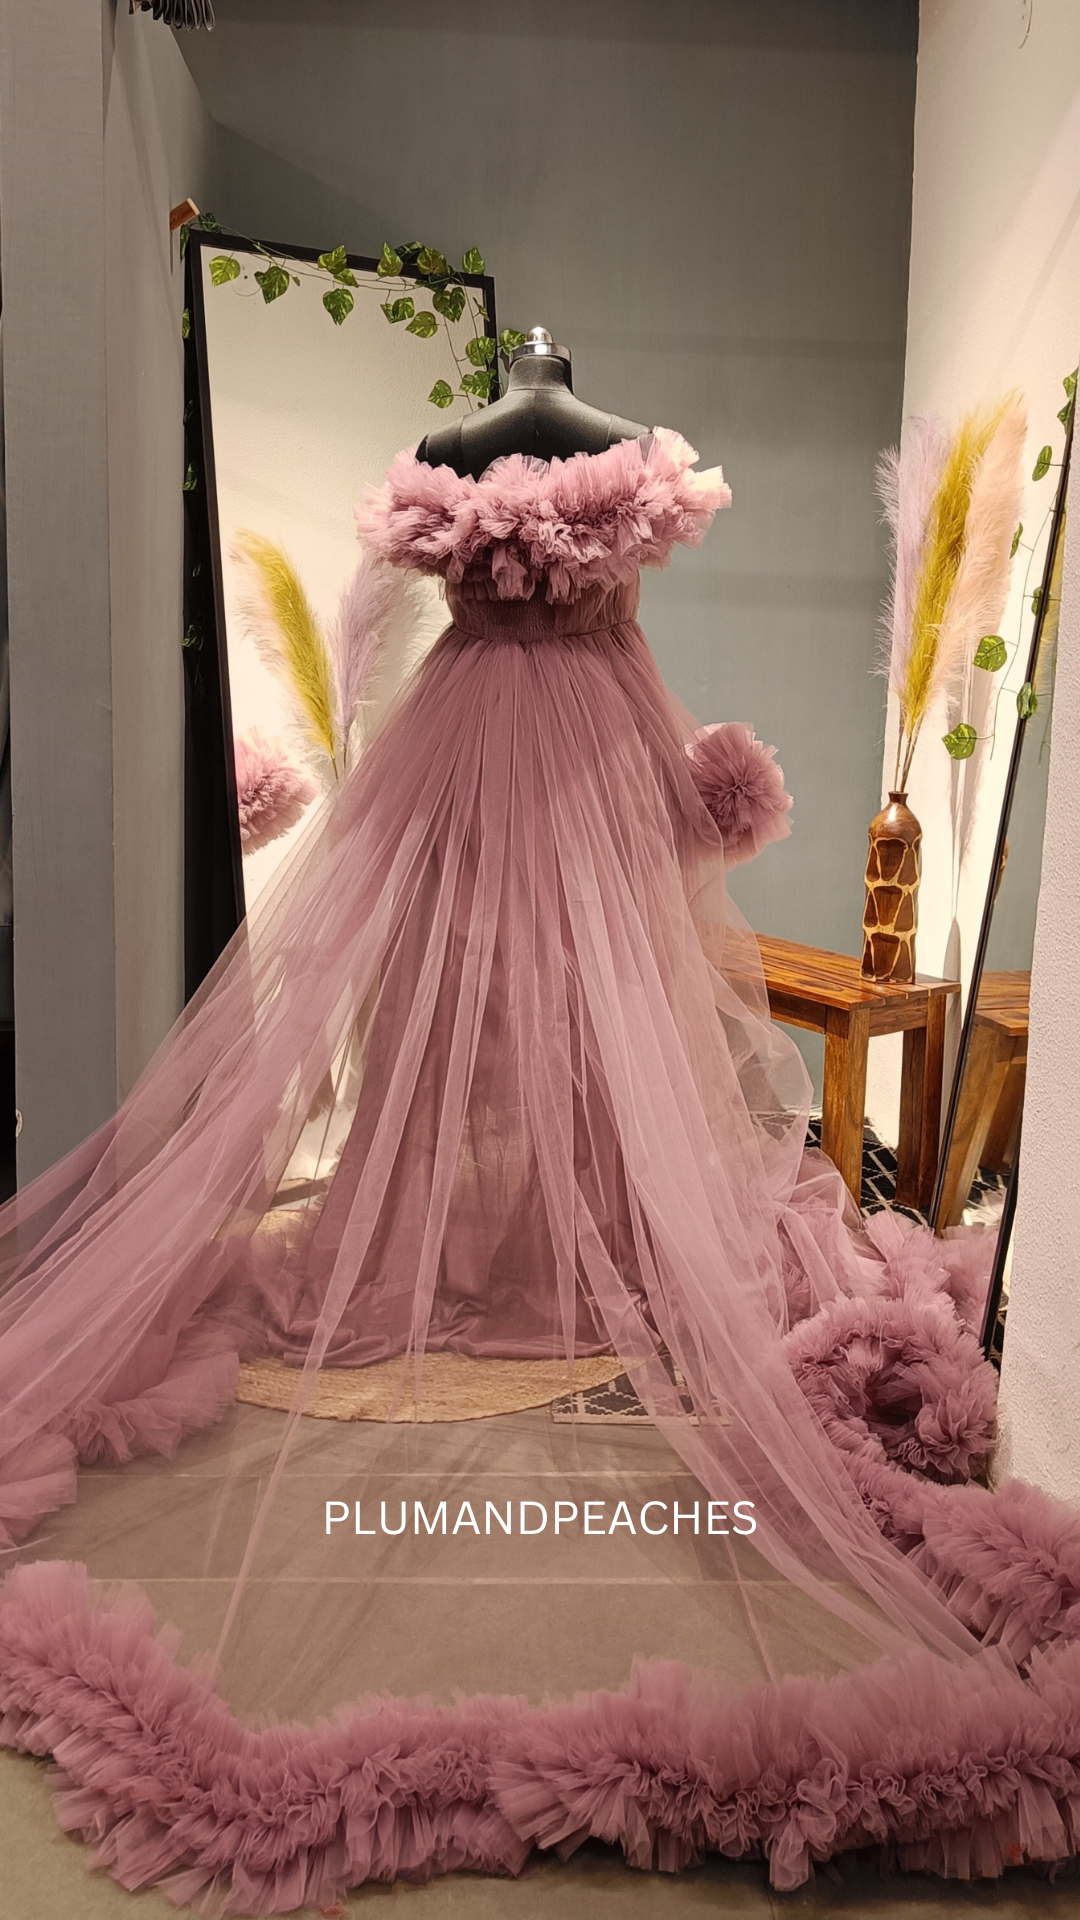 Pink Tulle Gown for Photoshoot